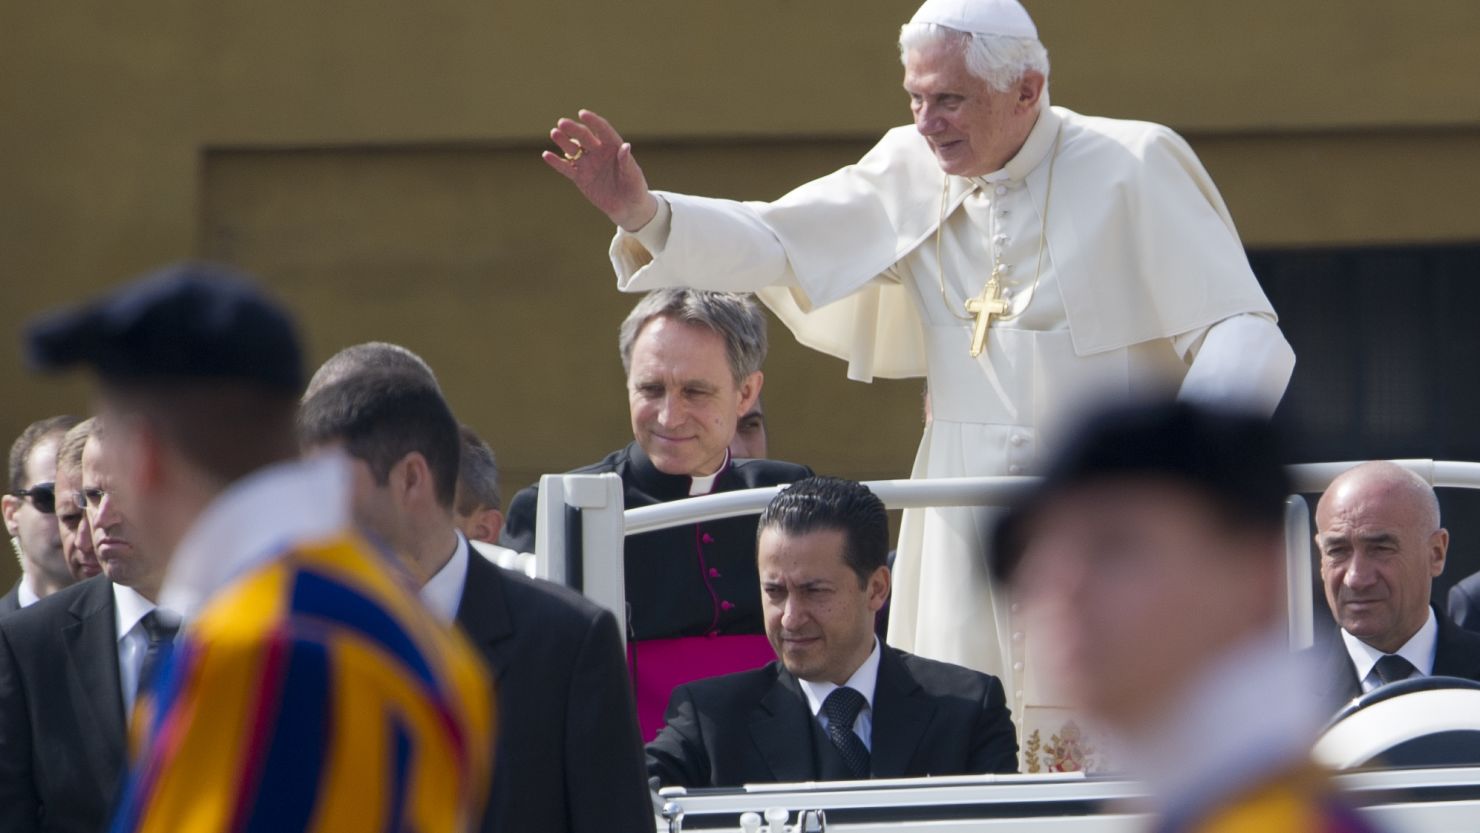 Pope Benedict XVI waves as he stands in his "popemobile" with his butler Paolo Gabriele, center seated.